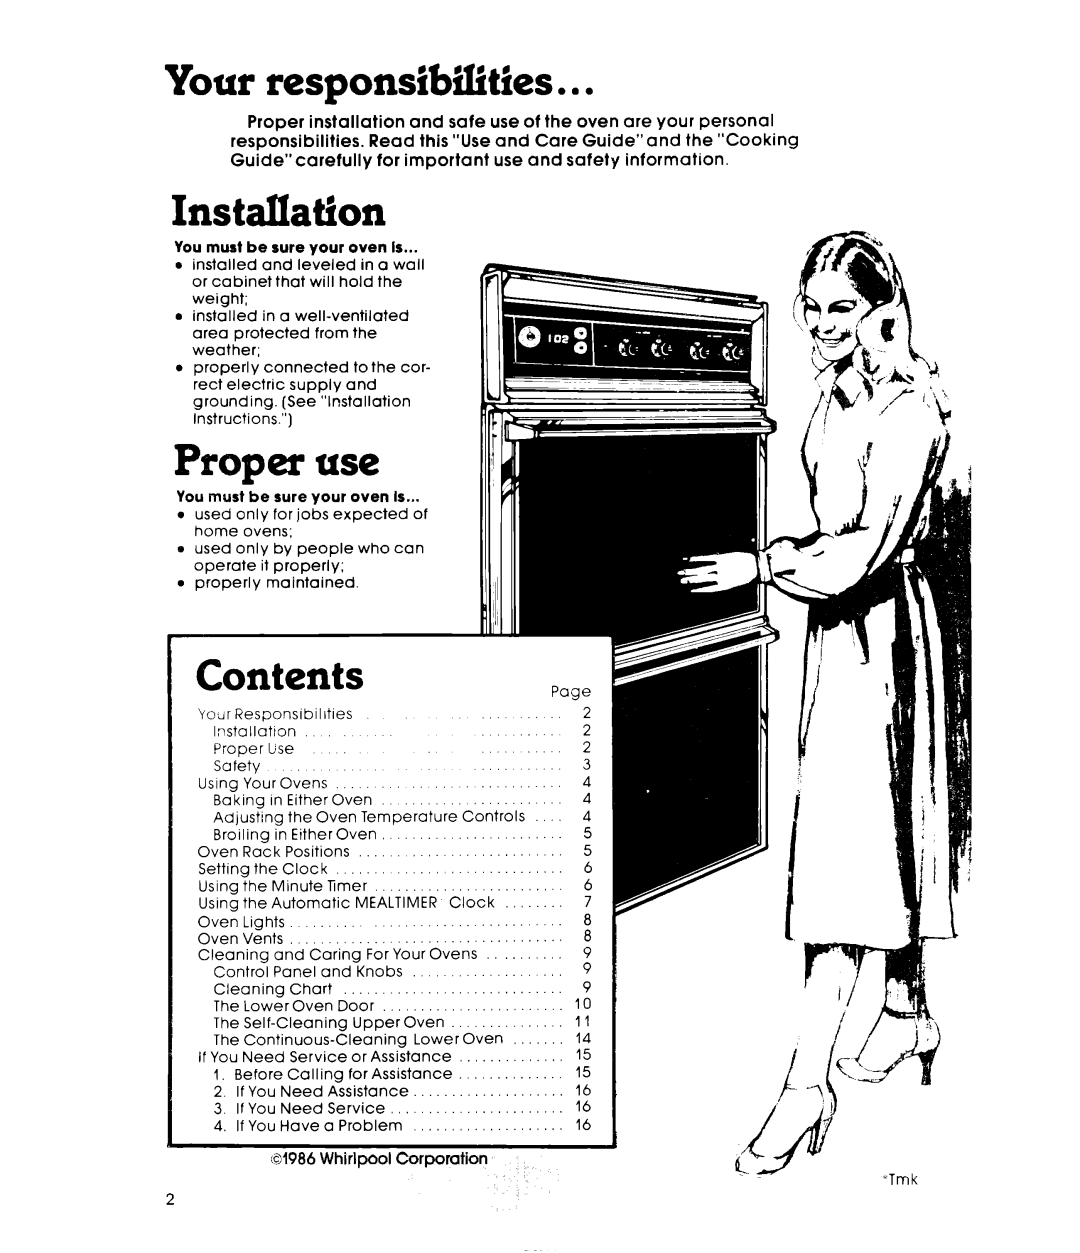 Whirlpool RB47OPXL manual Your responsibilities. l, Installation, Proper use, Contents 